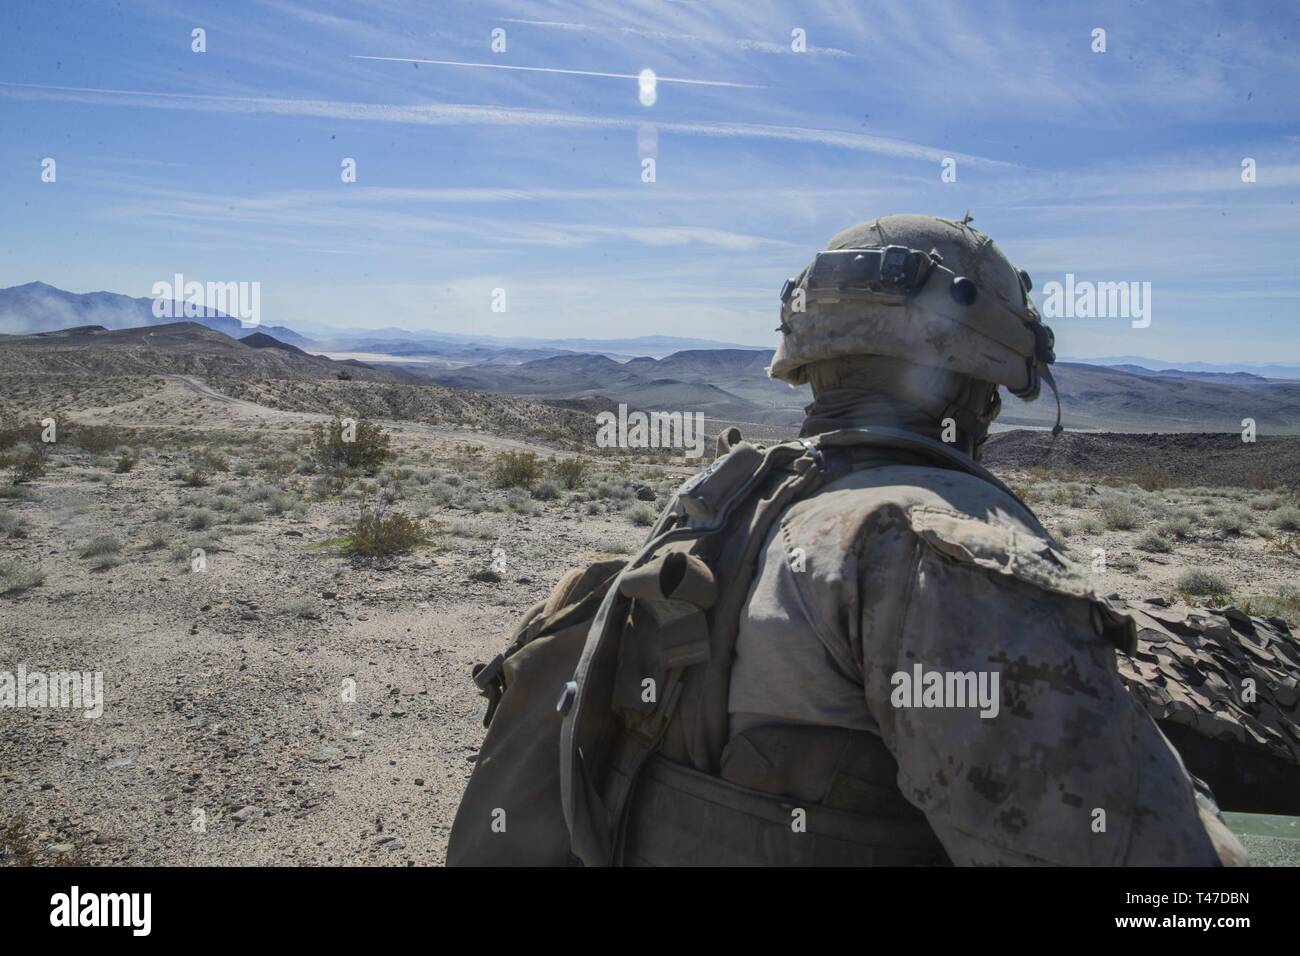 U.S. Marine Lance Cpl. Sam A. Pooley, a rifleman with 2nd Light Armored Reconnaissance Battalion, 2nd Marine Division scans the valley below during a deployment for training at Fort Irwin, California, March 15, 2019. The Marines of 2d Light Armored Reconnaissance Battalion participated in National Training Center 19-05 as the opposing force against the 2nd Armored Brigade Combat Team, 1st Infantry Division. The exercise provided Marines and Sailors an opportunity to sustain training in primary conventional combat operations against a peer competitor. Stock Photo